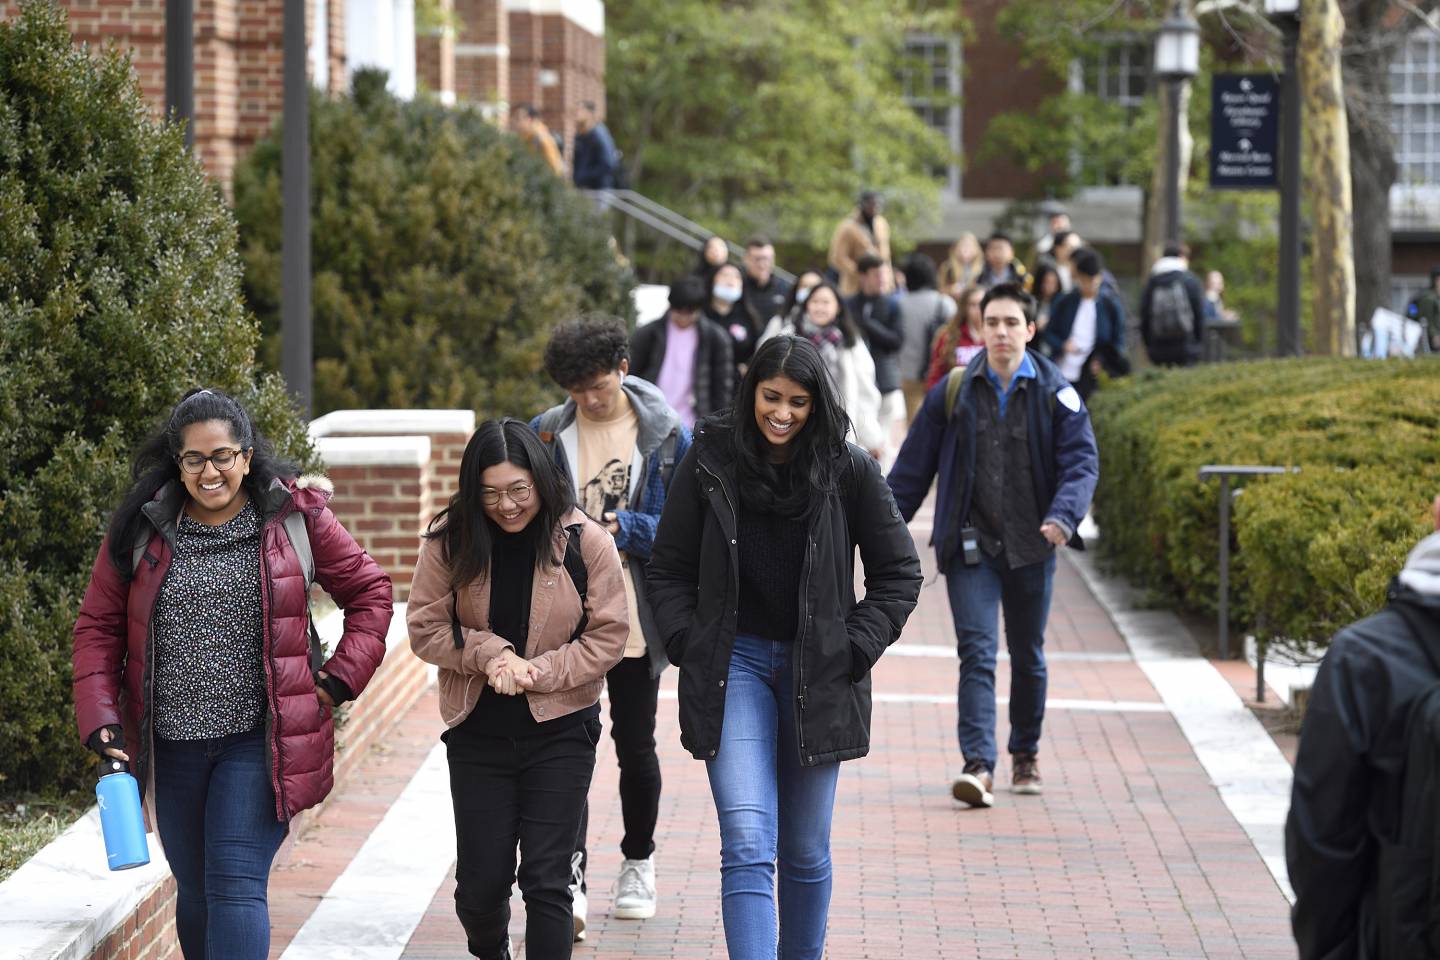 A throng of students walk to class